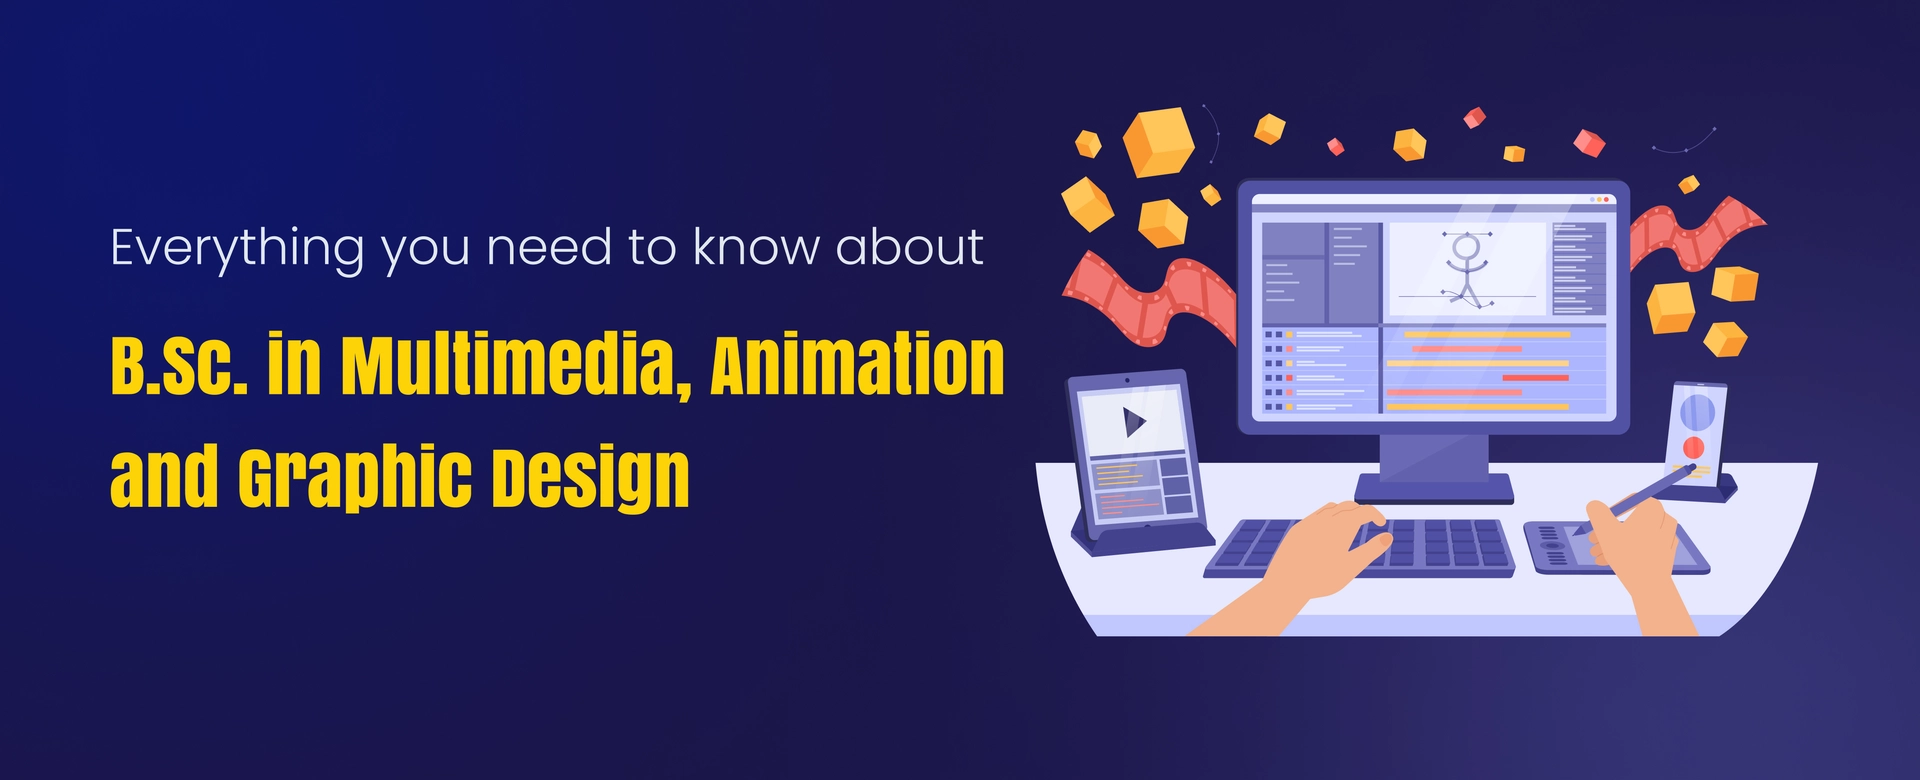 animation and graphic design courses